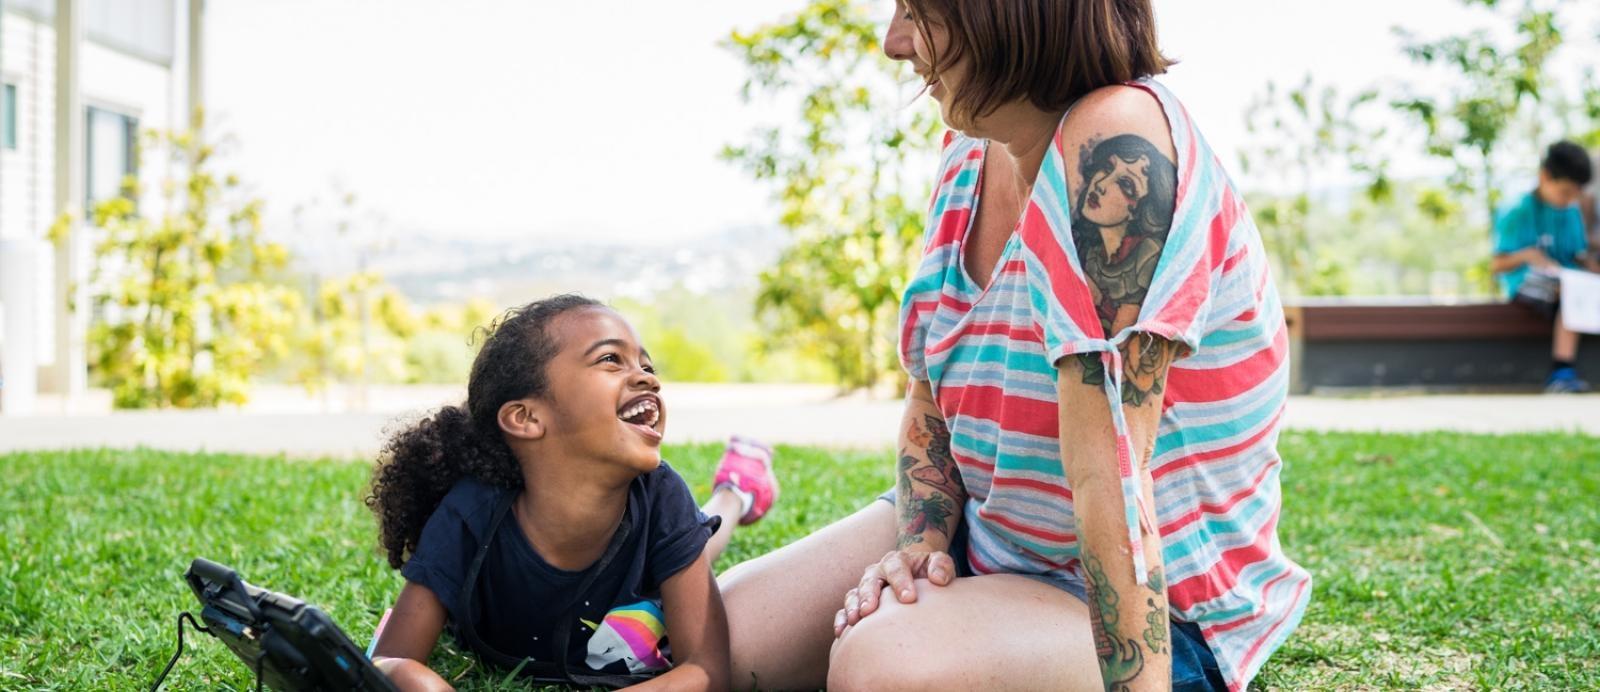 young girl with a disability lies on the grass smiling up at carer